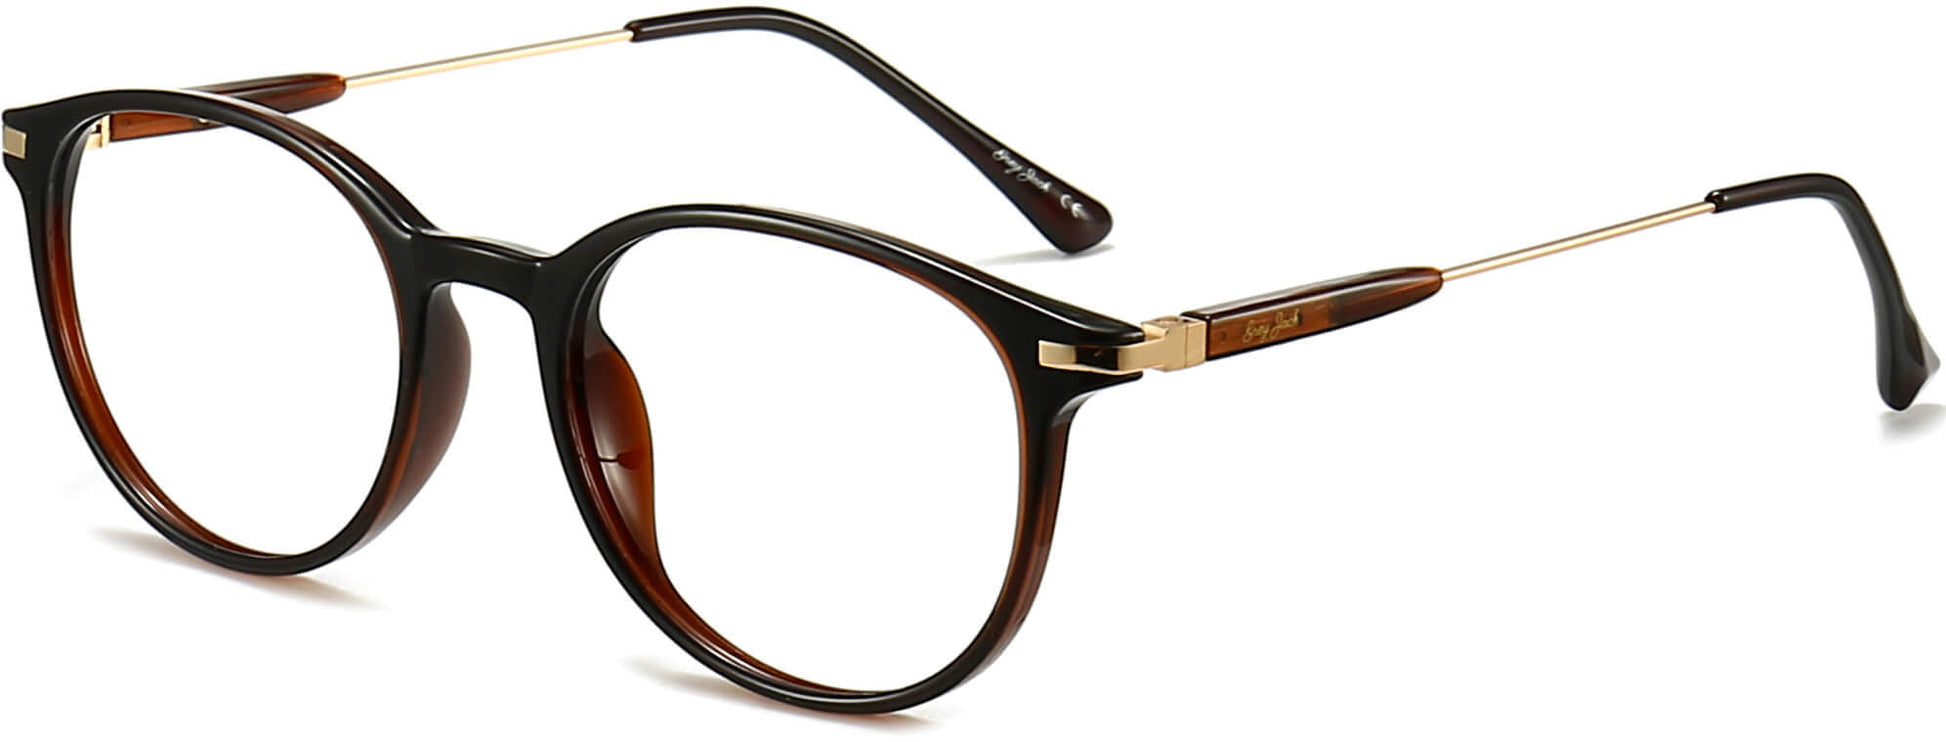 Edison Round Brown Eyeglasses from ANRRI, angle view